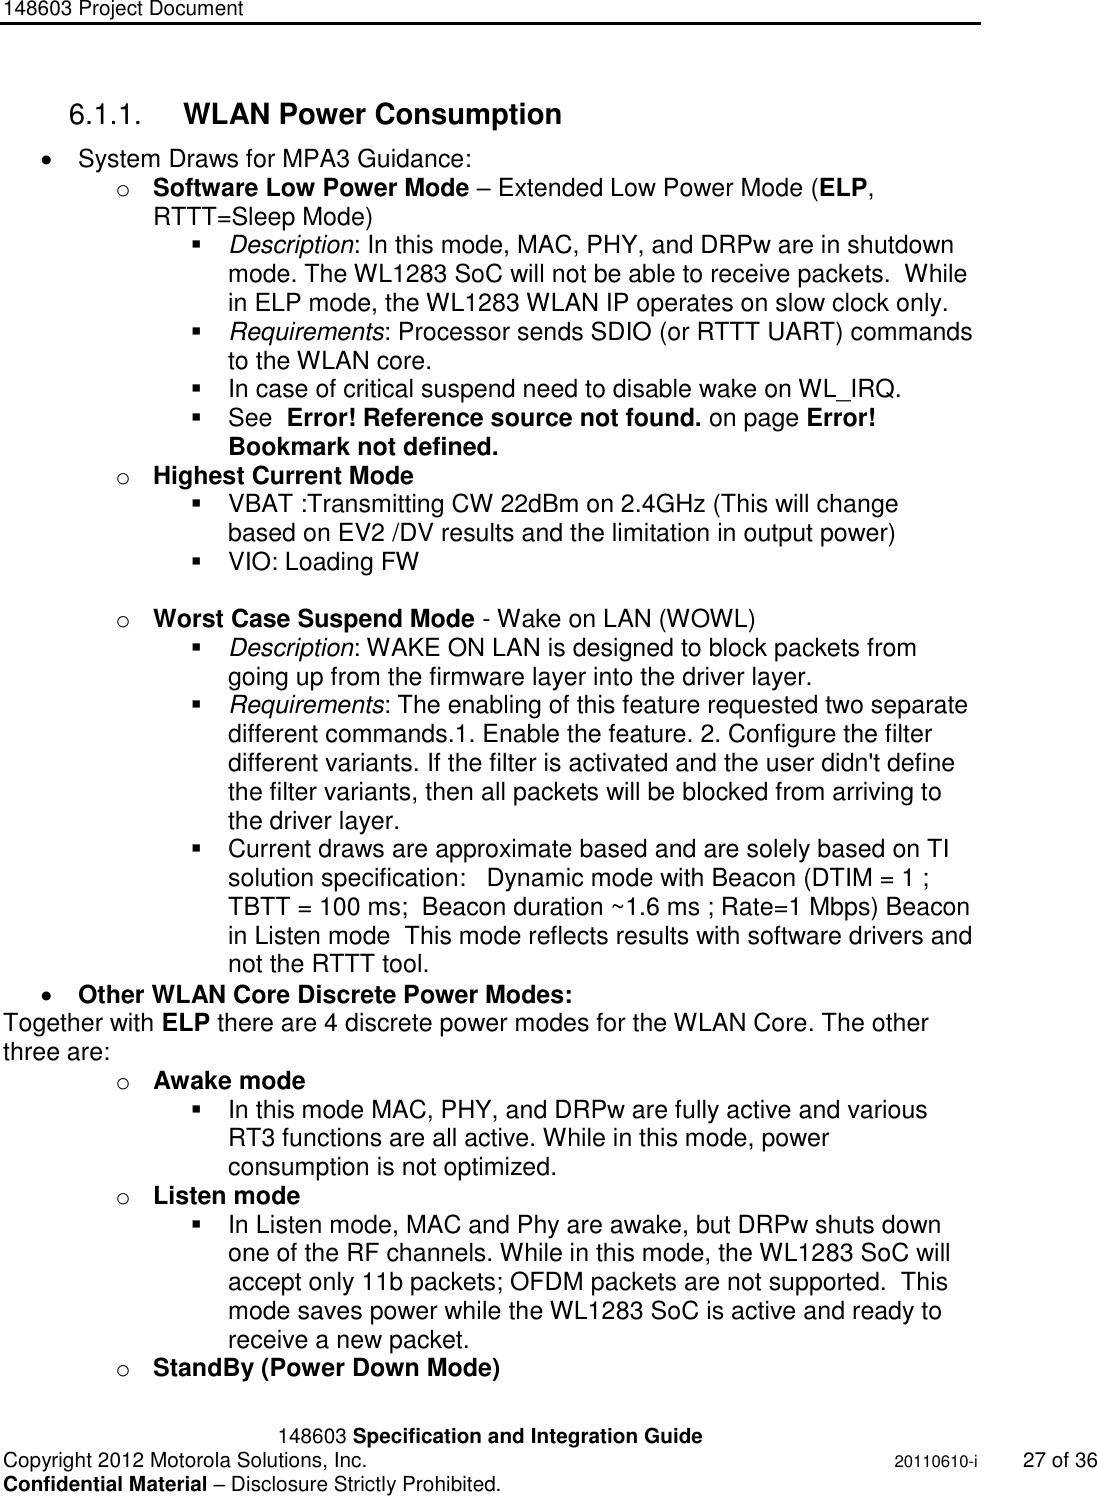 148603 Project Document       148603 Specification and Integration Guide  Copyright 2012 Motorola Solutions, Inc.    20110610-i 27 of 36 Confidential Material – Disclosure Strictly Prohibited. &quot;Ni ckel Leucochroic  Puffin&quot; 6.1.1.  WLAN Power Consumption   System Draws for MPA3 Guidance: o Software Low Power Mode – Extended Low Power Mode (ELP, RTTT=Sleep Mode)  Description: In this mode, MAC, PHY, and DRPw are in shutdown mode. The WL1283 SoC will not be able to receive packets.  While in ELP mode, the WL1283 WLAN IP operates on slow clock only.   Requirements: Processor sends SDIO (or RTTT UART) commands to the WLAN core.   In case of critical suspend need to disable wake on WL_IRQ.   See  Error! Reference source not found. on page Error! Bookmark not defined. o Highest Current Mode   VBAT :Transmitting CW 22dBm on 2.4GHz (This will change  based on EV2 /DV results and the limitation in output power)   VIO: Loading FW  o Worst Case Suspend Mode - Wake on LAN (WOWL)  Description: WAKE ON LAN is designed to block packets from going up from the firmware layer into the driver layer.   Requirements: The enabling of this feature requested two separate different commands.1. Enable the feature. 2. Configure the filter different variants. If the filter is activated and the user didn&apos;t define the filter variants, then all packets will be blocked from arriving to the driver layer.    Current draws are approximate based and are solely based on TI solution specification:   Dynamic mode with Beacon (DTIM = 1 ; TBTT = 100 ms;  Beacon duration ~1.6 ms ; Rate=1 Mbps) Beacon in Listen mode  This mode reflects results with software drivers and not the RTTT tool.  Other WLAN Core Discrete Power Modes: Together with ELP there are 4 discrete power modes for the WLAN Core. The other three are:  o Awake mode    In this mode MAC, PHY, and DRPw are fully active and various RT3 functions are all active. While in this mode, power consumption is not optimized. o Listen mode    In Listen mode, MAC and Phy are awake, but DRPw shuts down one of the RF channels. While in this mode, the WL1283 SoC will accept only 11b packets; OFDM packets are not supported.  This mode saves power while the WL1283 SoC is active and ready to receive a new packet.  o StandBy (Power Down Mode)  